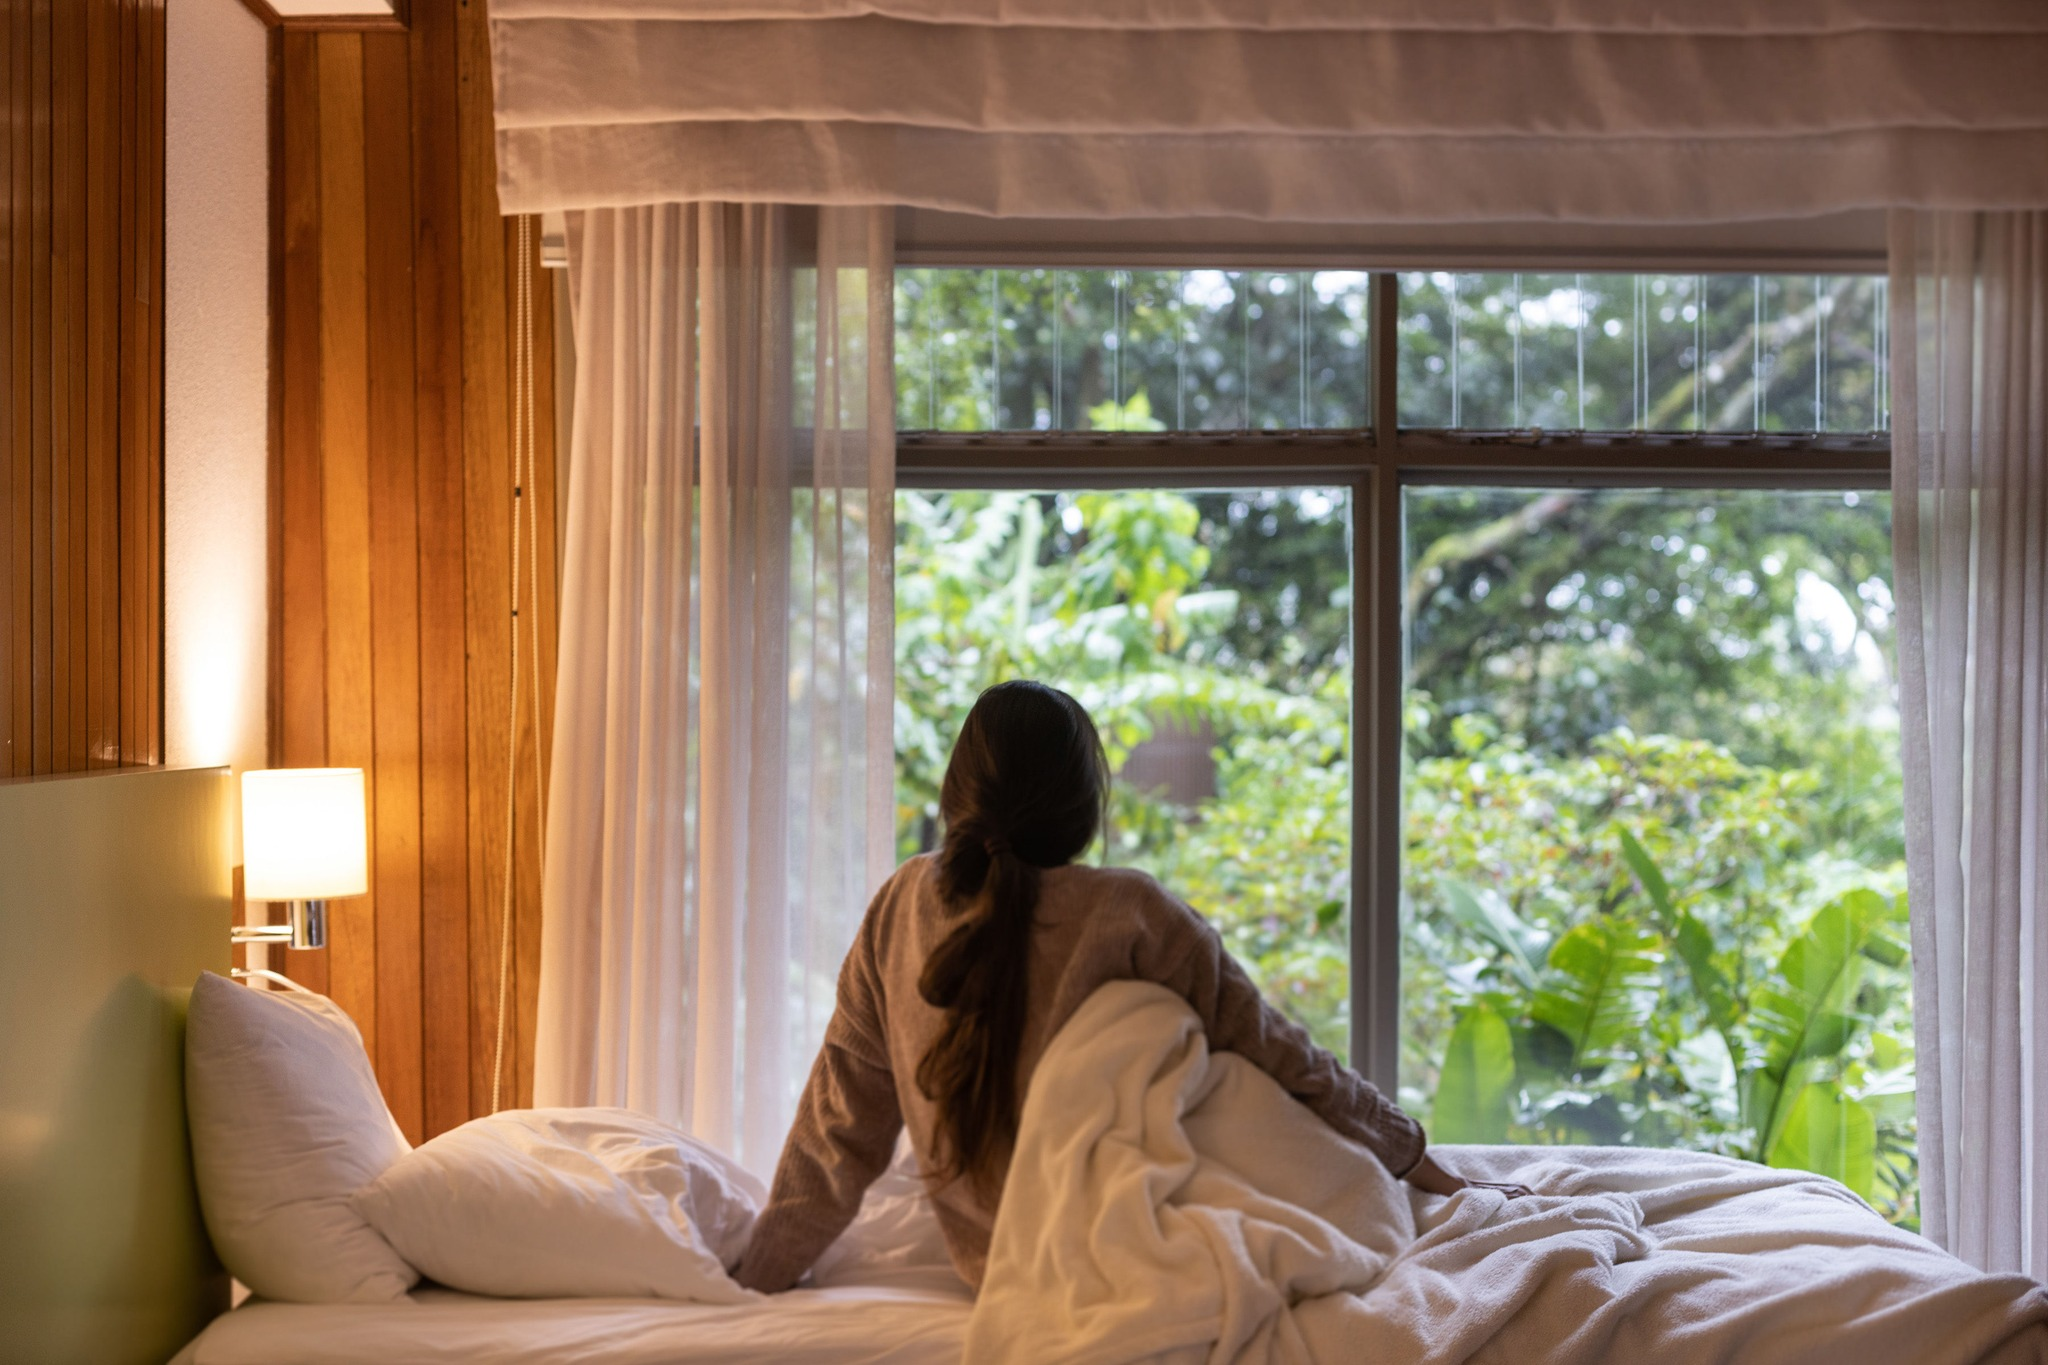 Let your stay in Monteverde become a comfortable experience and a conscious choice.